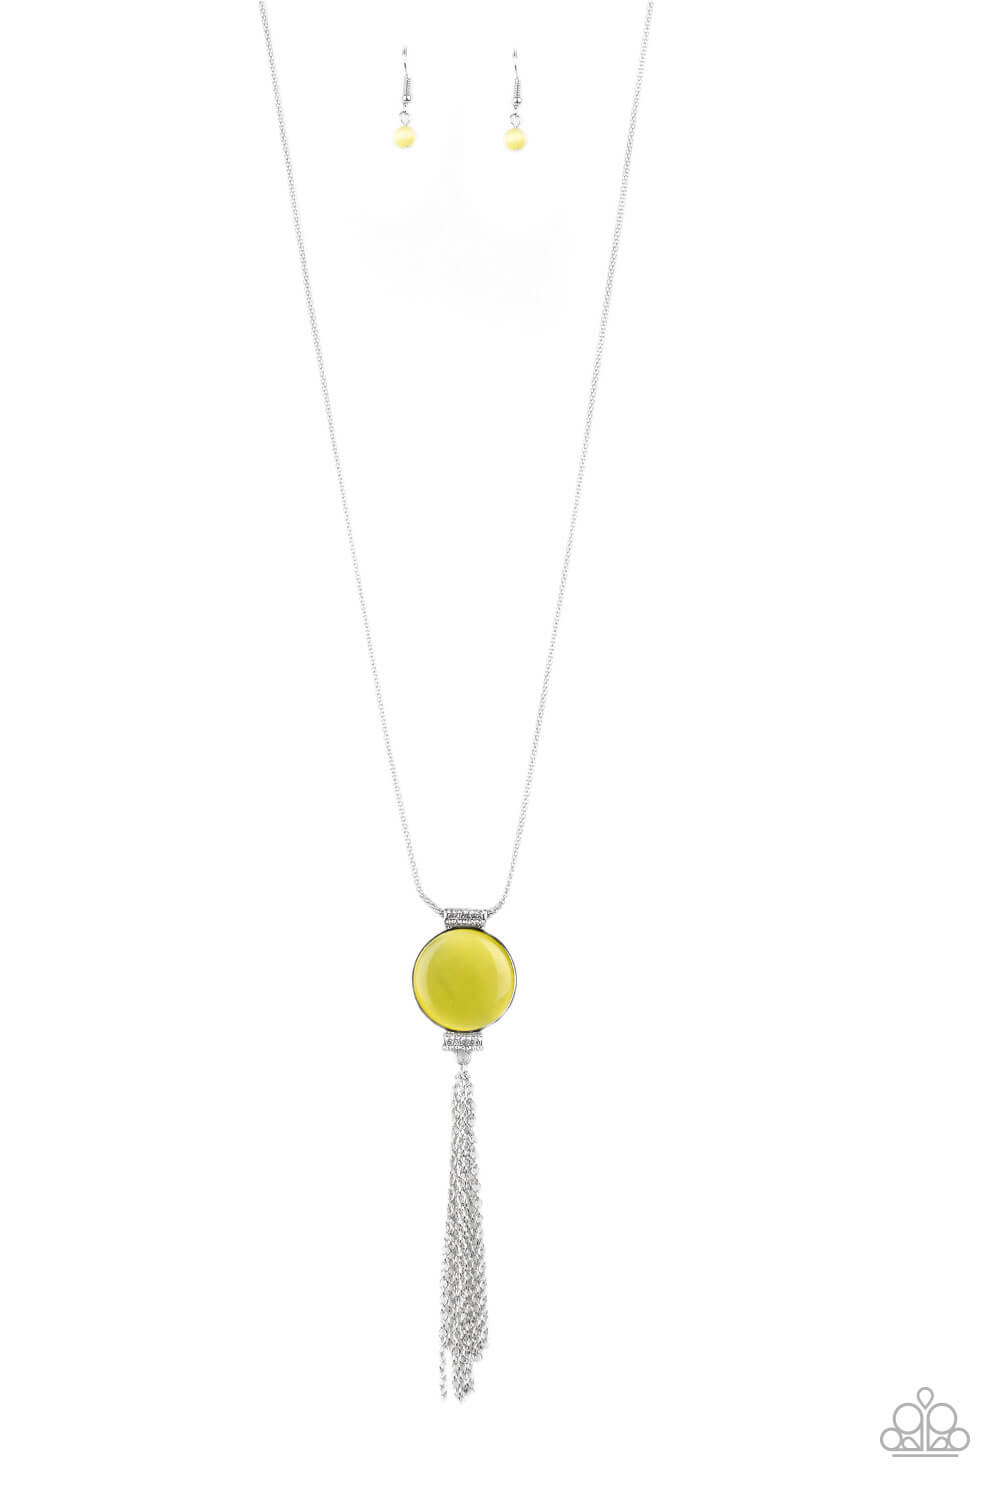 Happy As Can BEAM Yellow Necklace Set - Princess Glam Shop